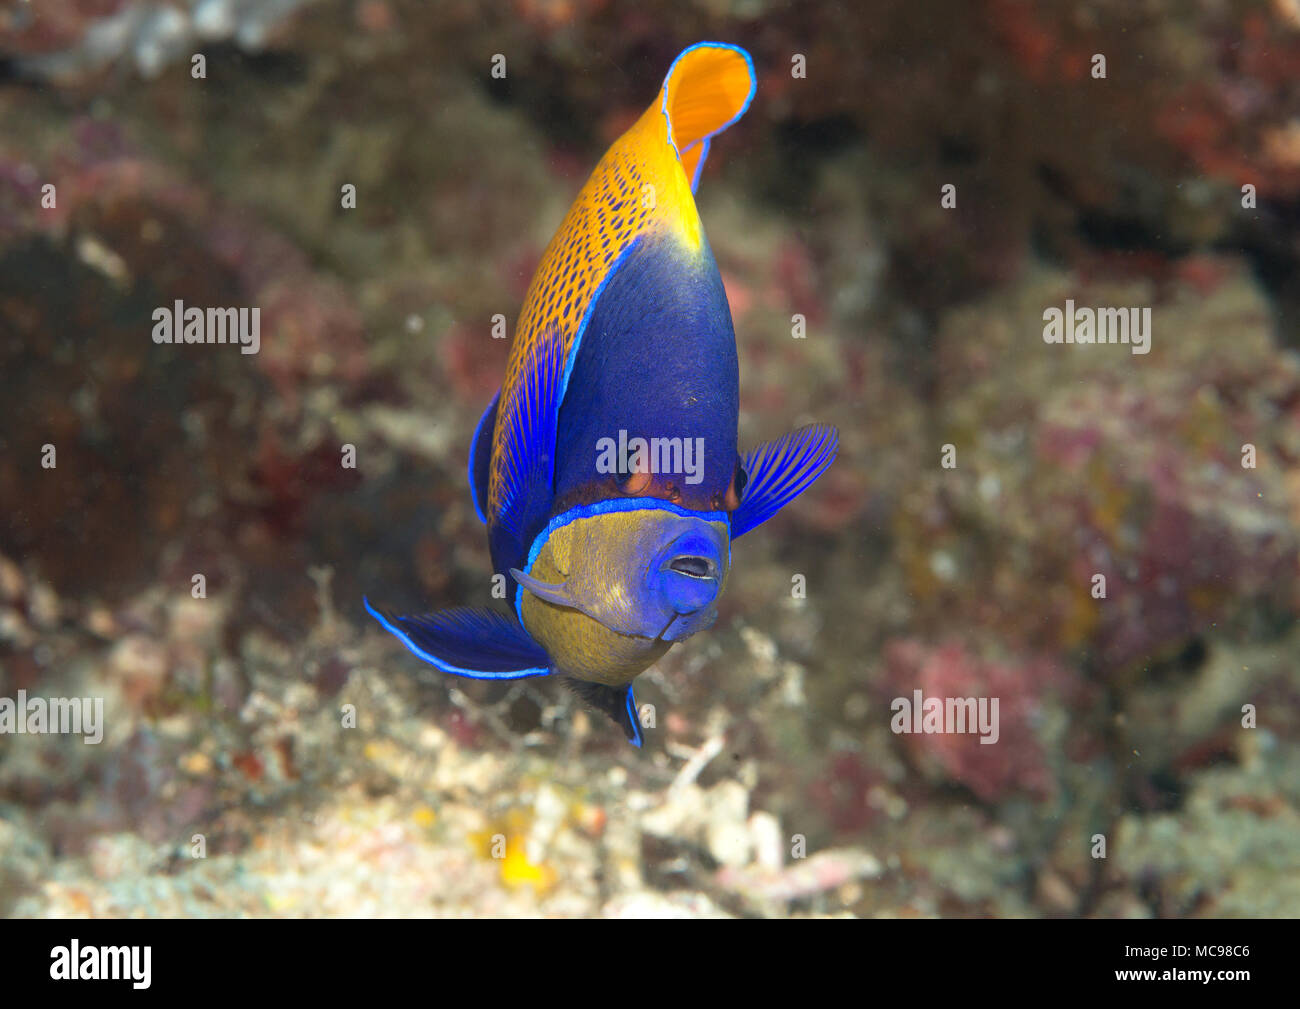 Blueface or yellowface angelfish ( Pomacanthus xanthometopon ) swimming over corals of Bali, Indonesia Stock Photo